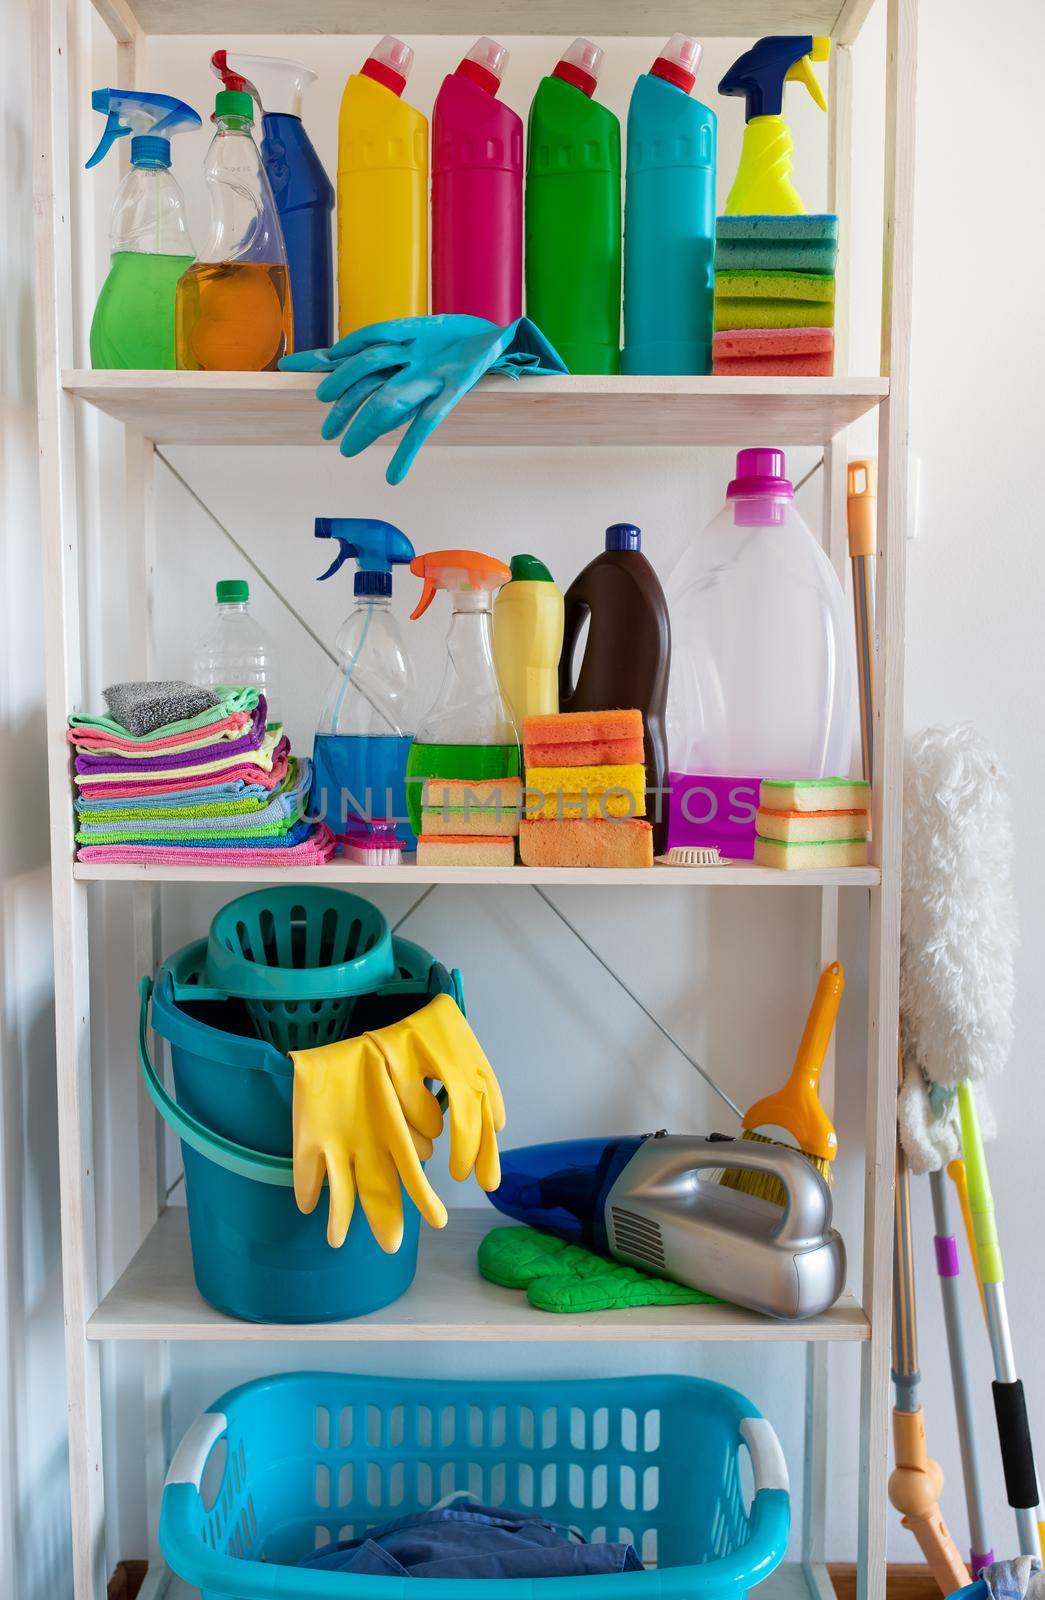 Shelves with cleaning products and tools in pantry